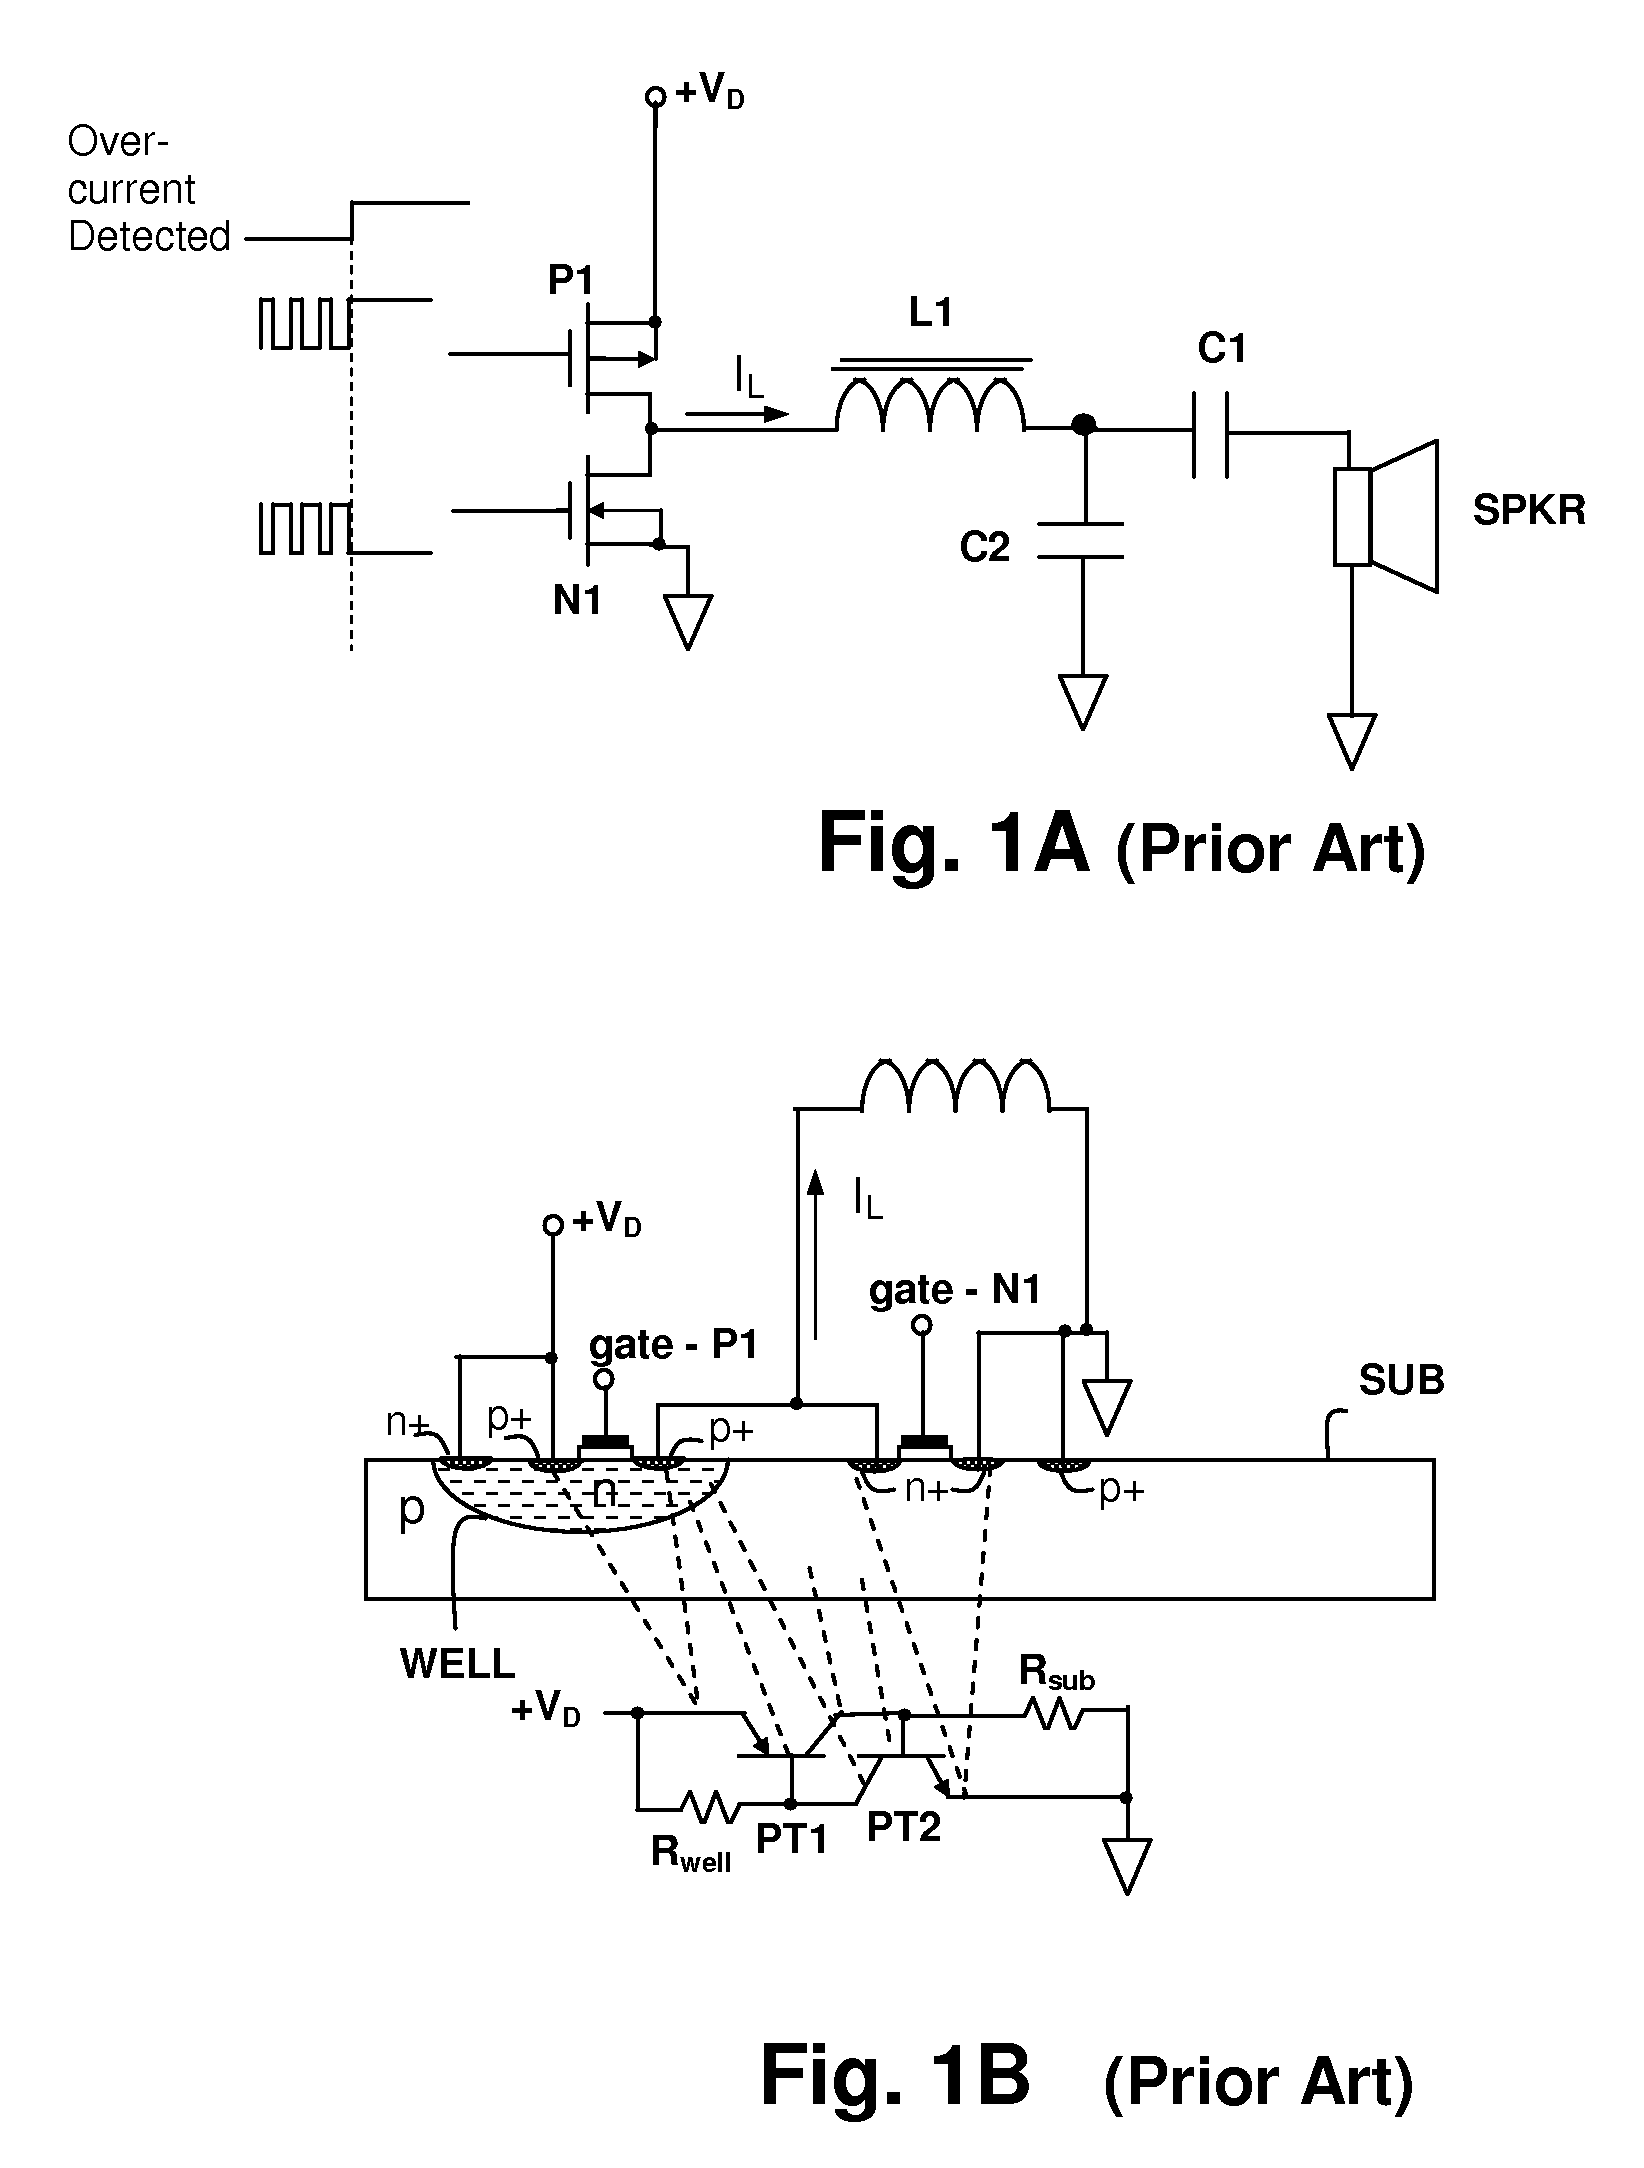 Over-current protection circuit and method for protecting switching power amplifier circuits